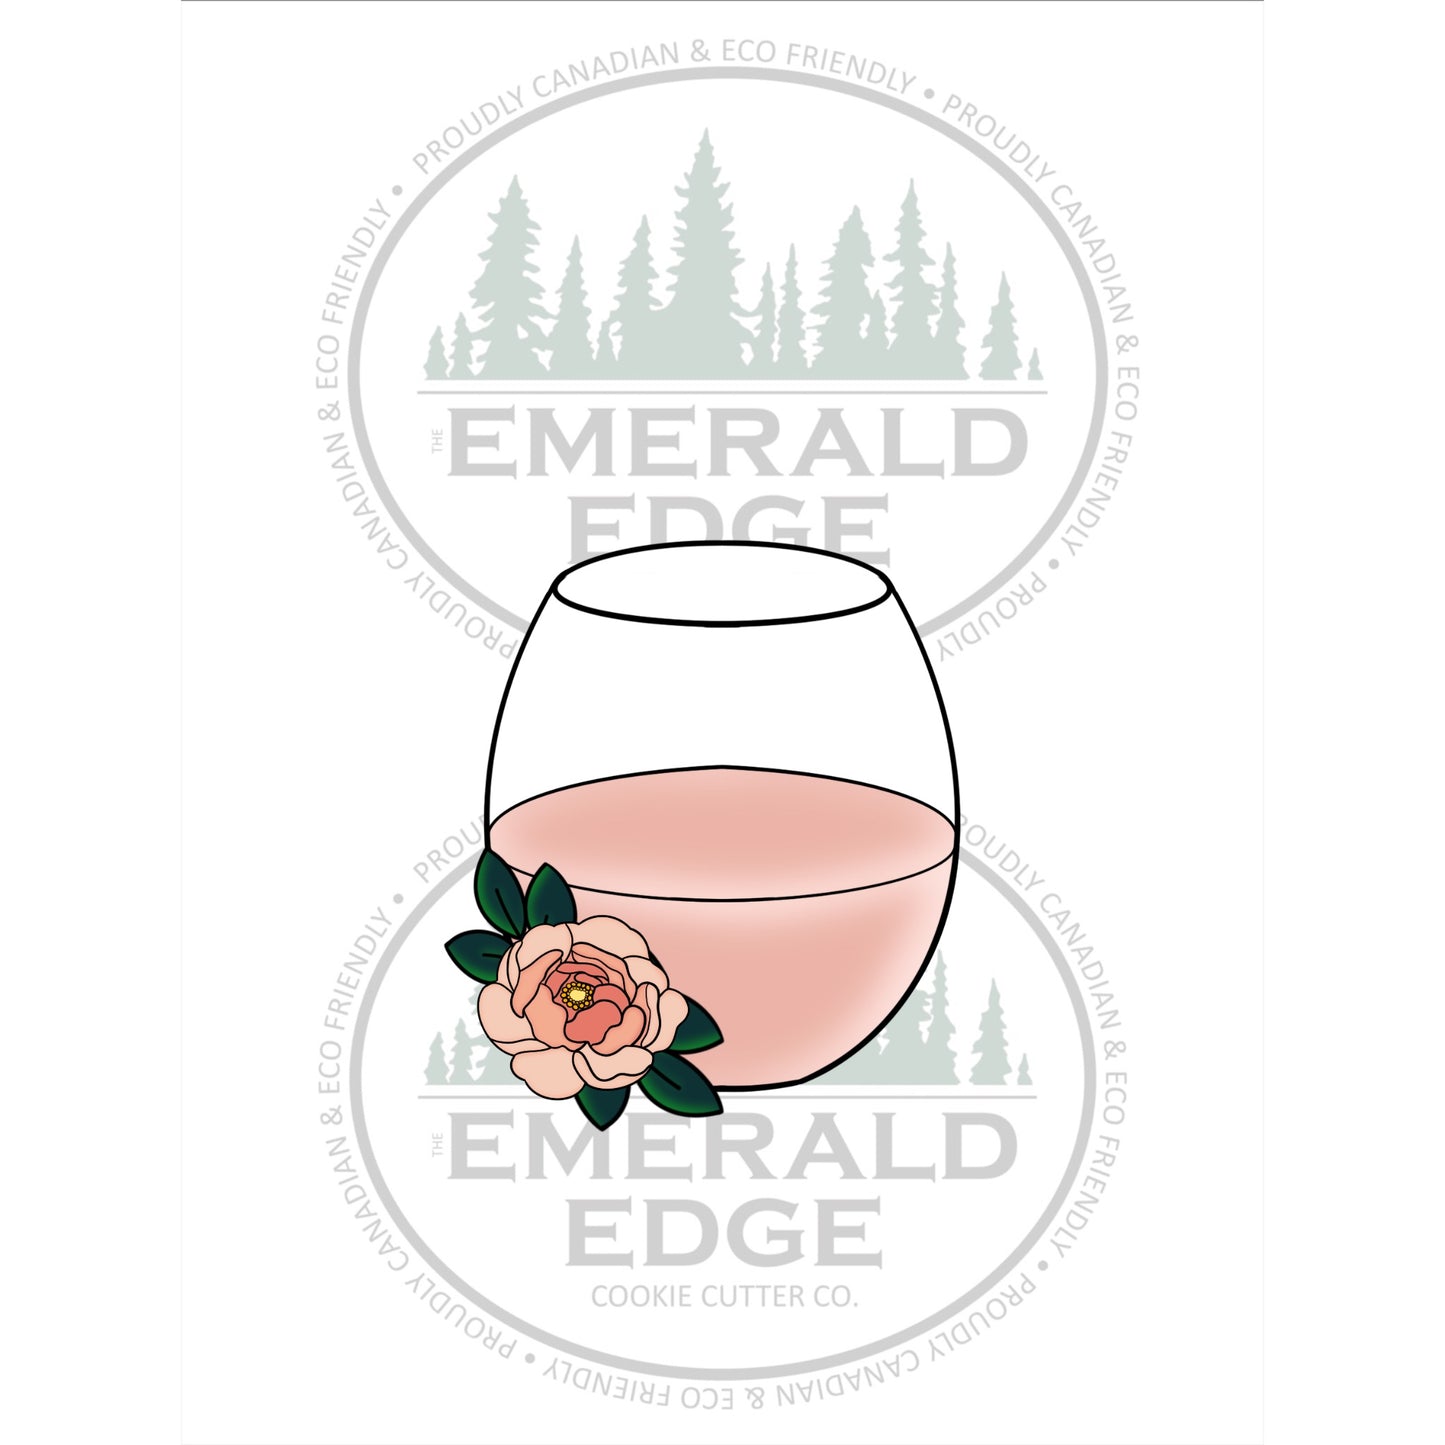 Floral Stemless Wine Glass